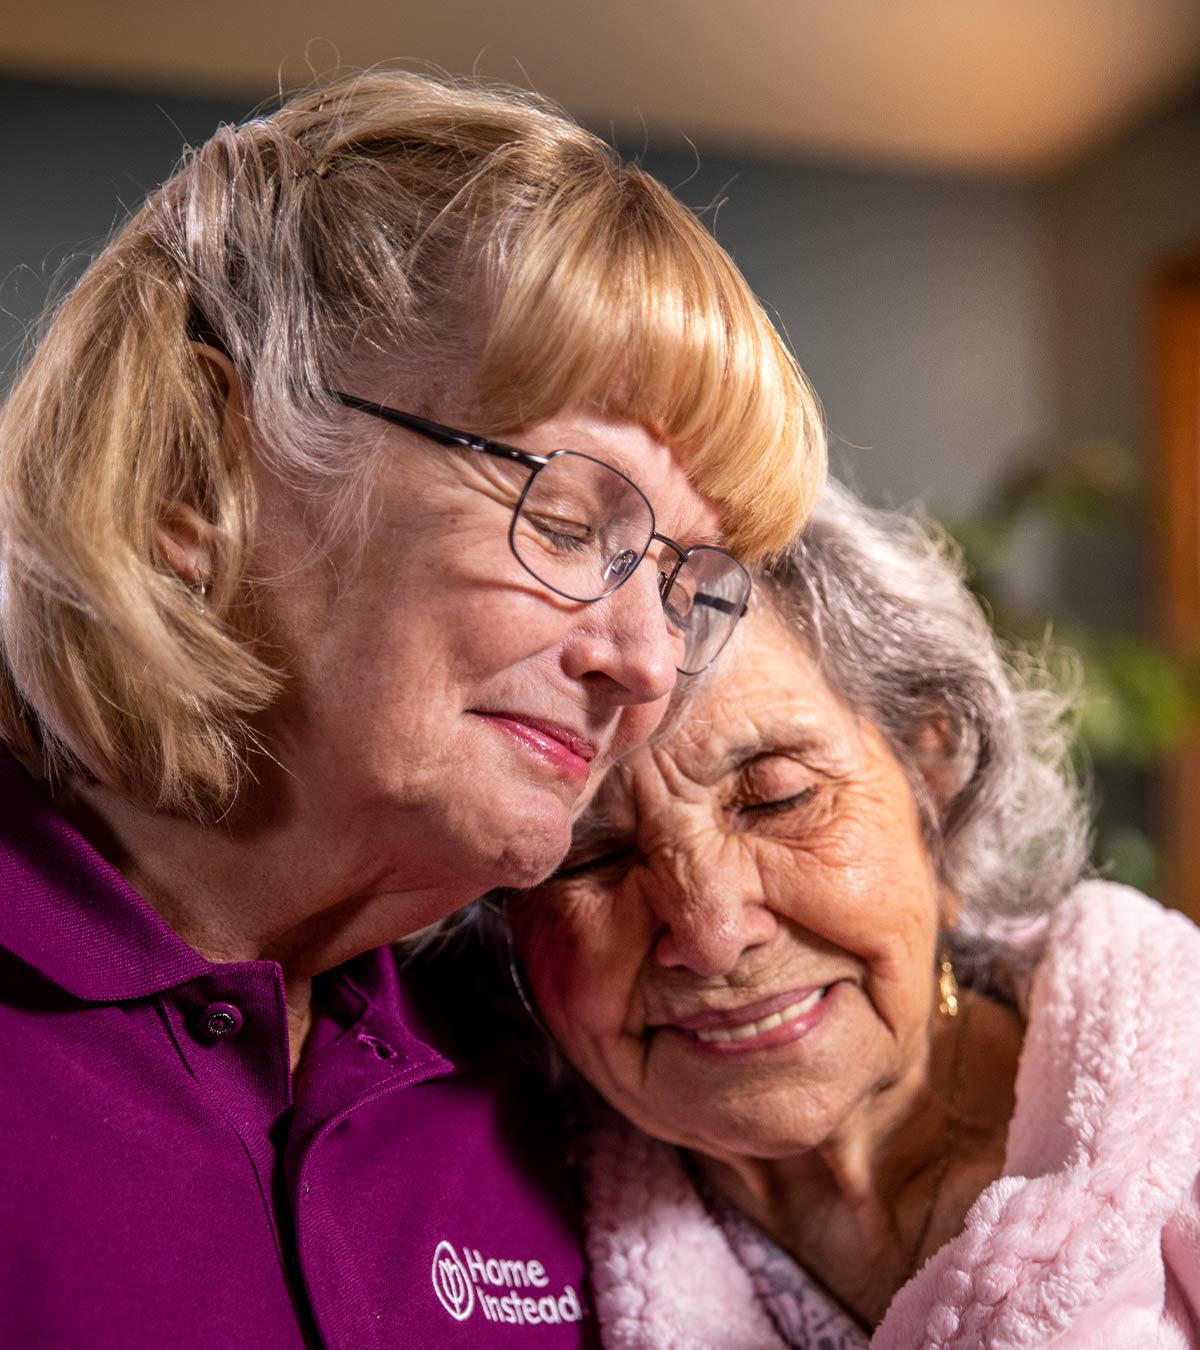 CAREGiver providing in-home senior care services. Home Instead of Courtenay, BC provides Elder Care to aging adults. 